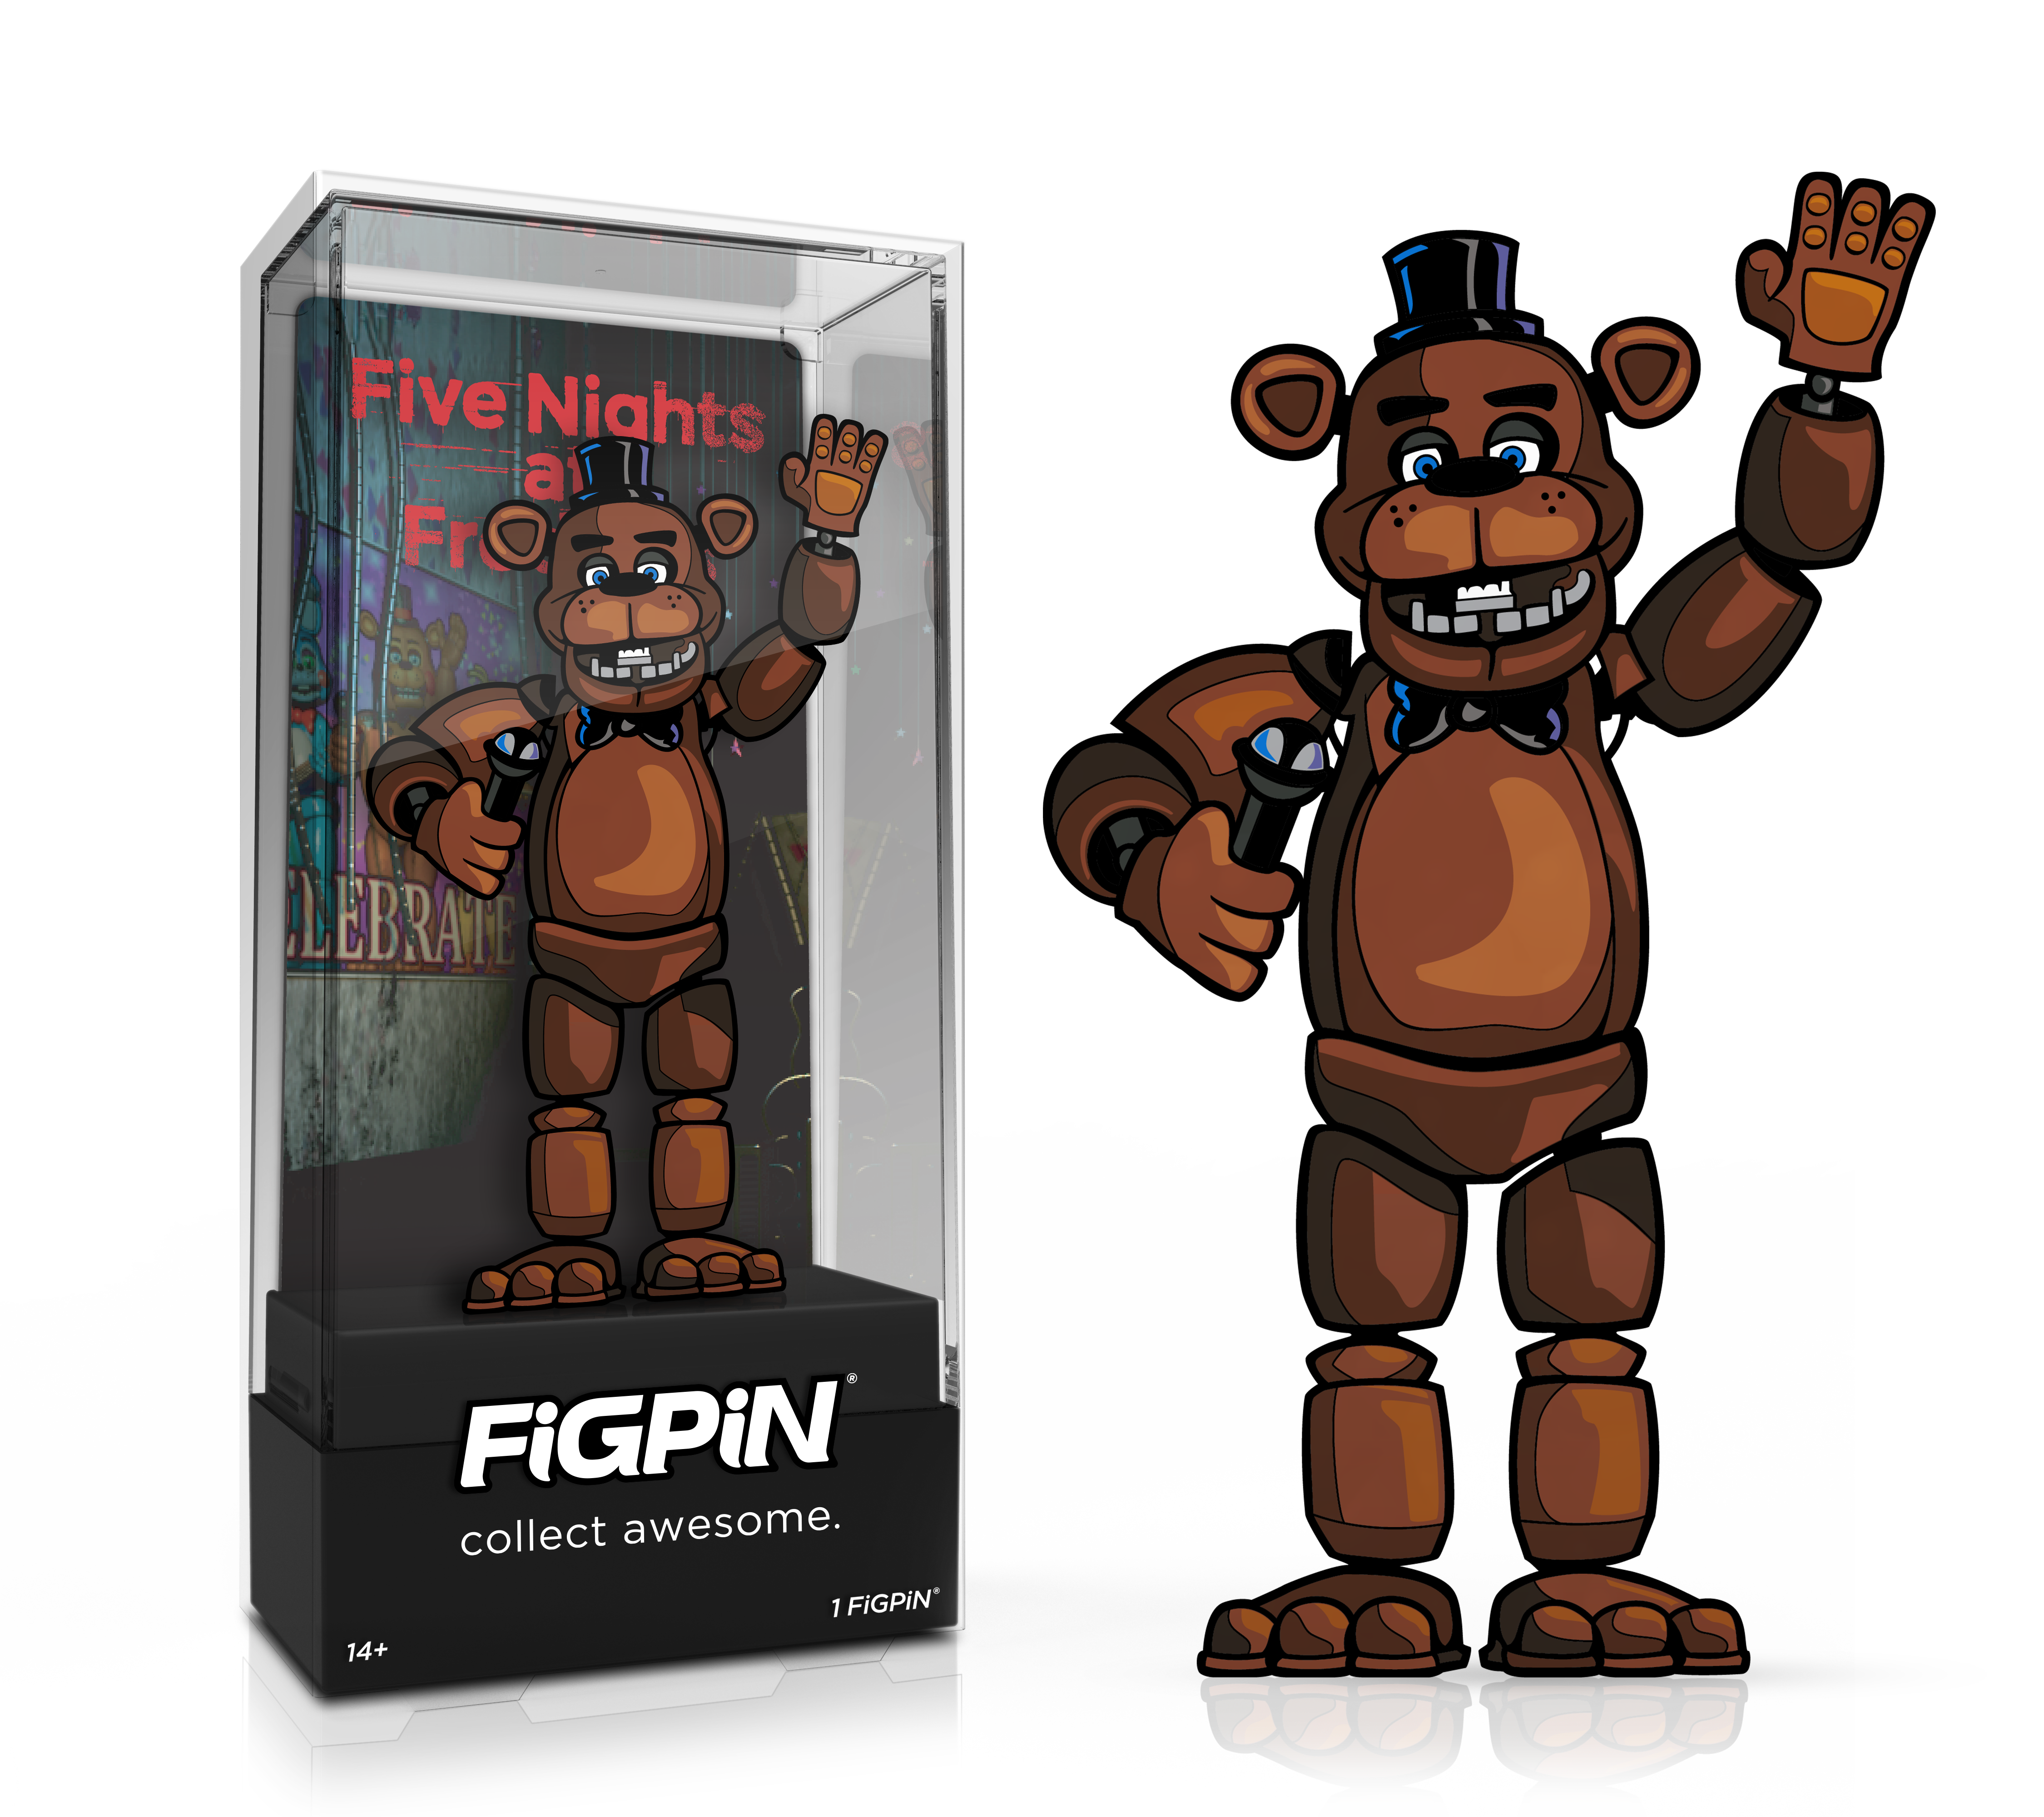 Side by side view of  Five Nights at Freddy's Freddy Fazbear enamel pin in display case and the art render.